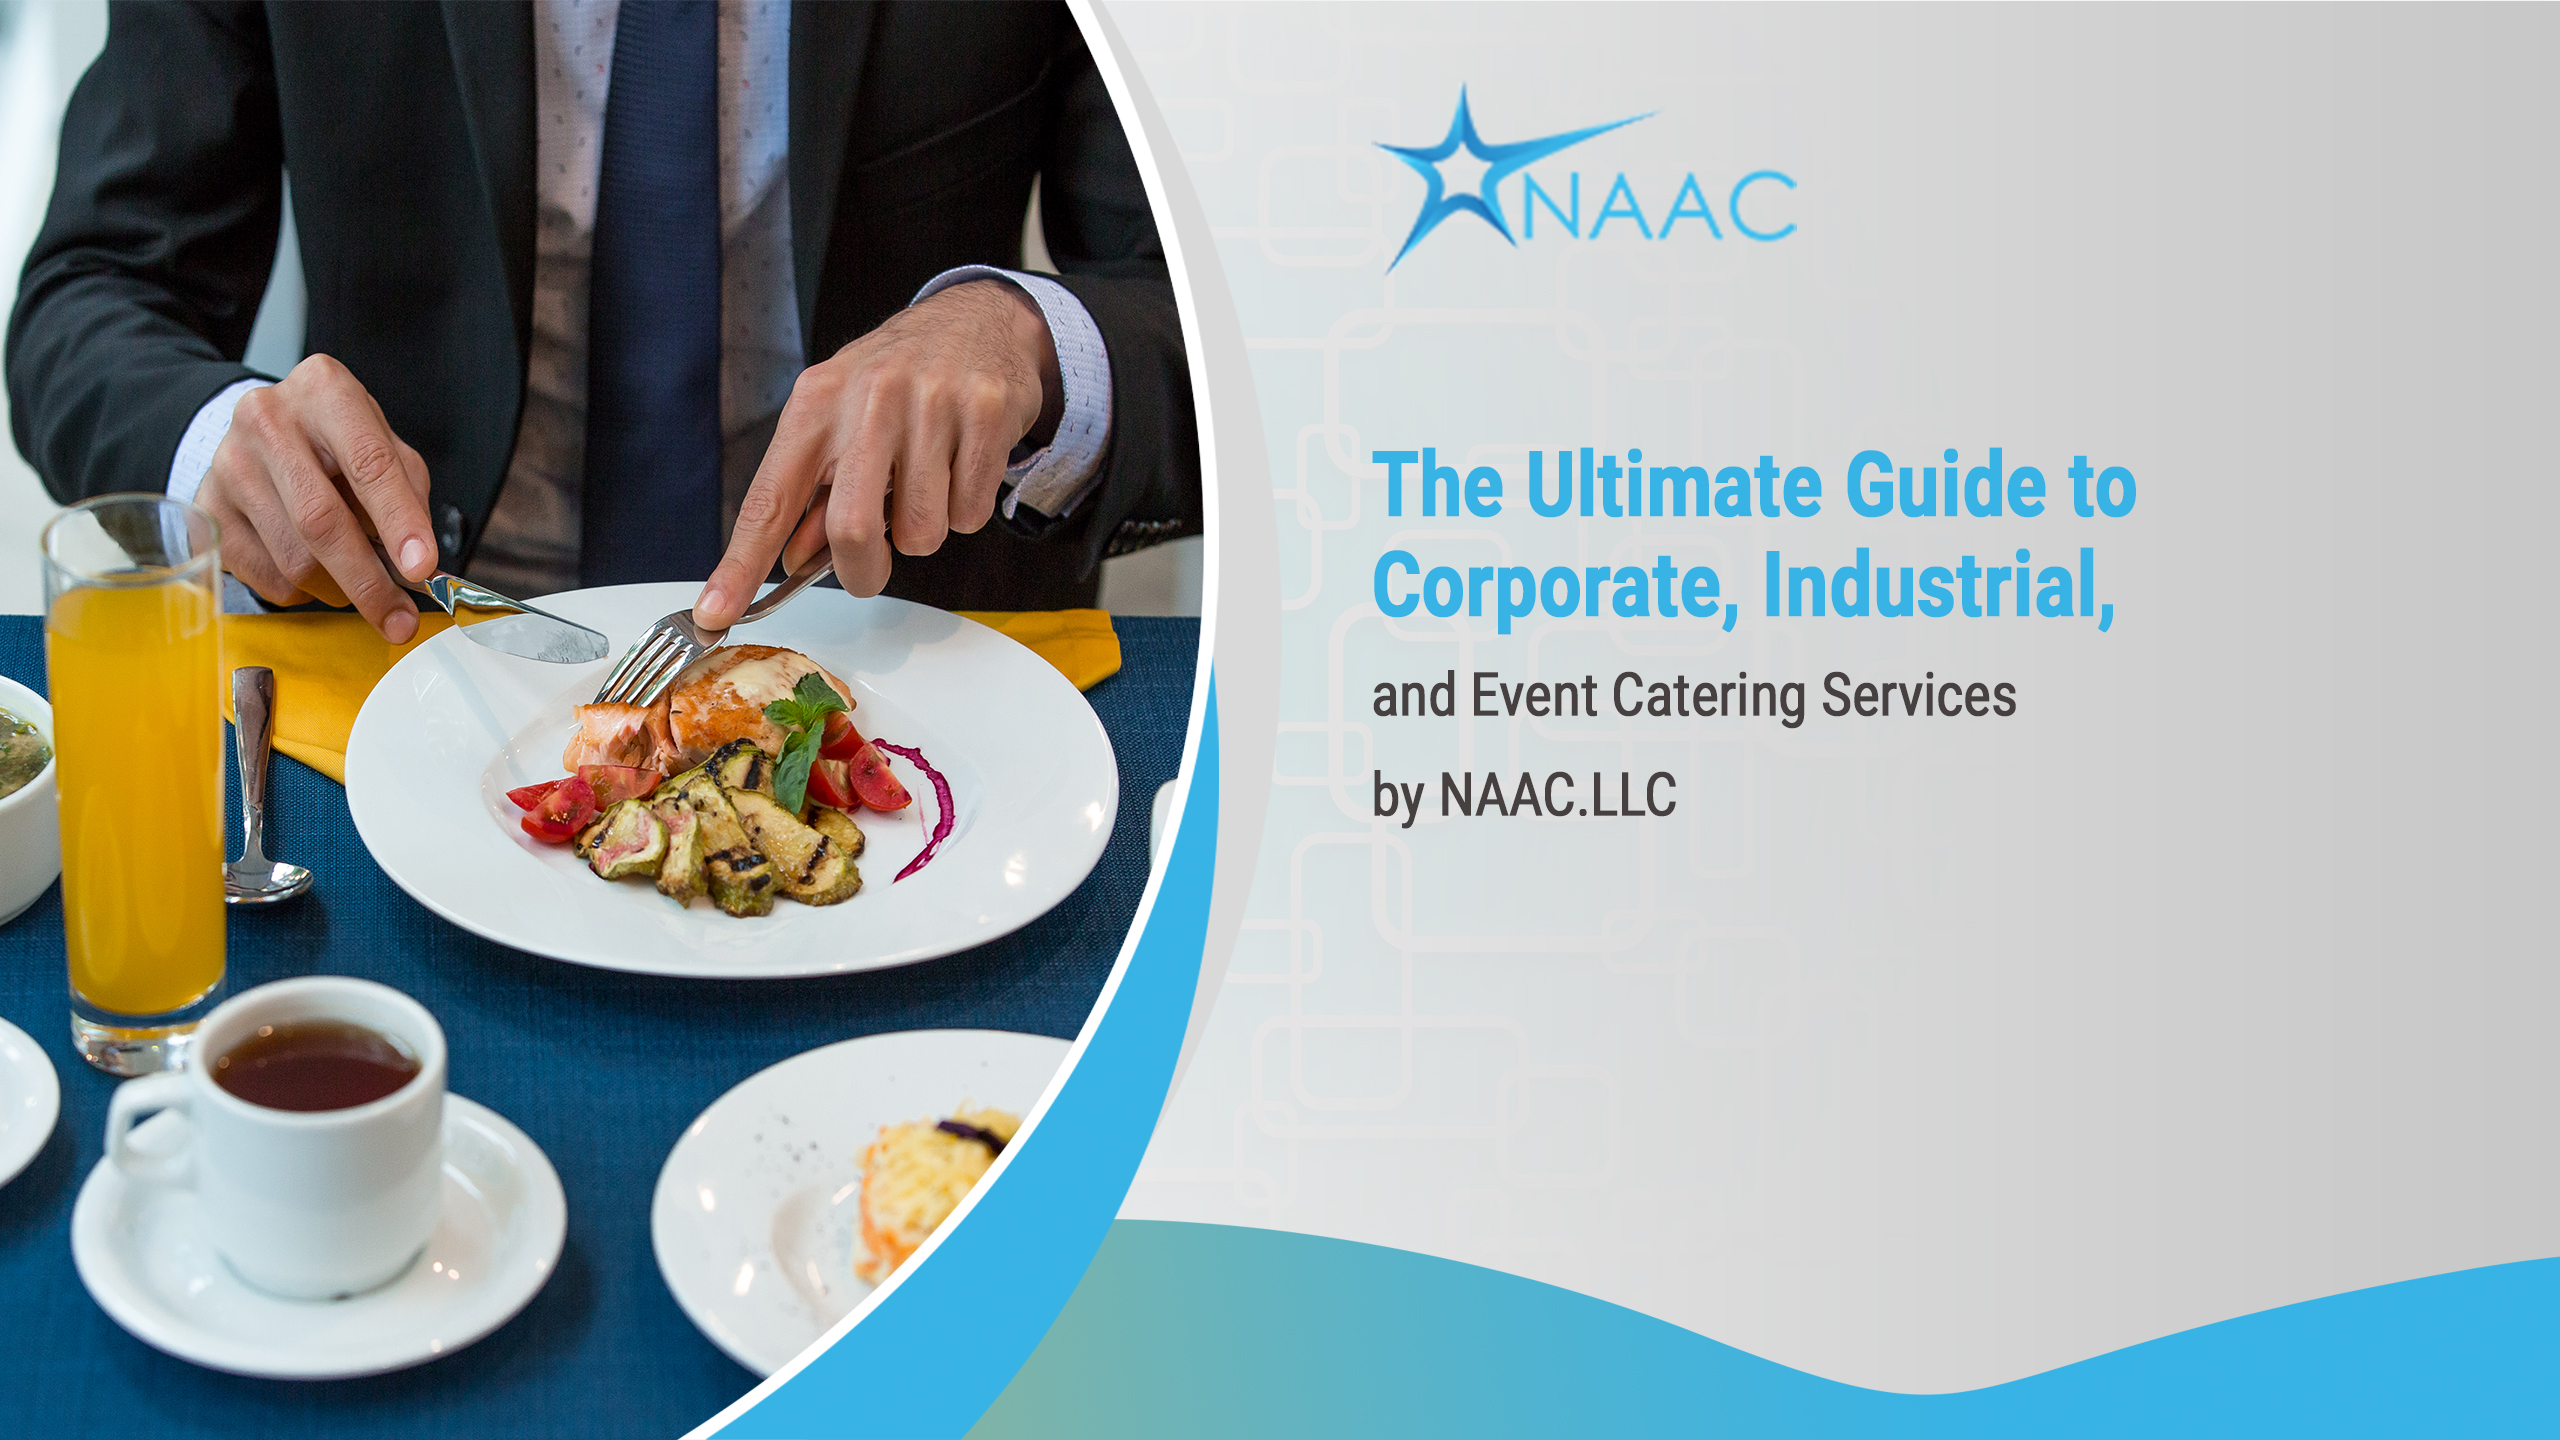 The Ultimate Guide to Corporate, Industrial, and Event Catering Services by NAAC.LLC